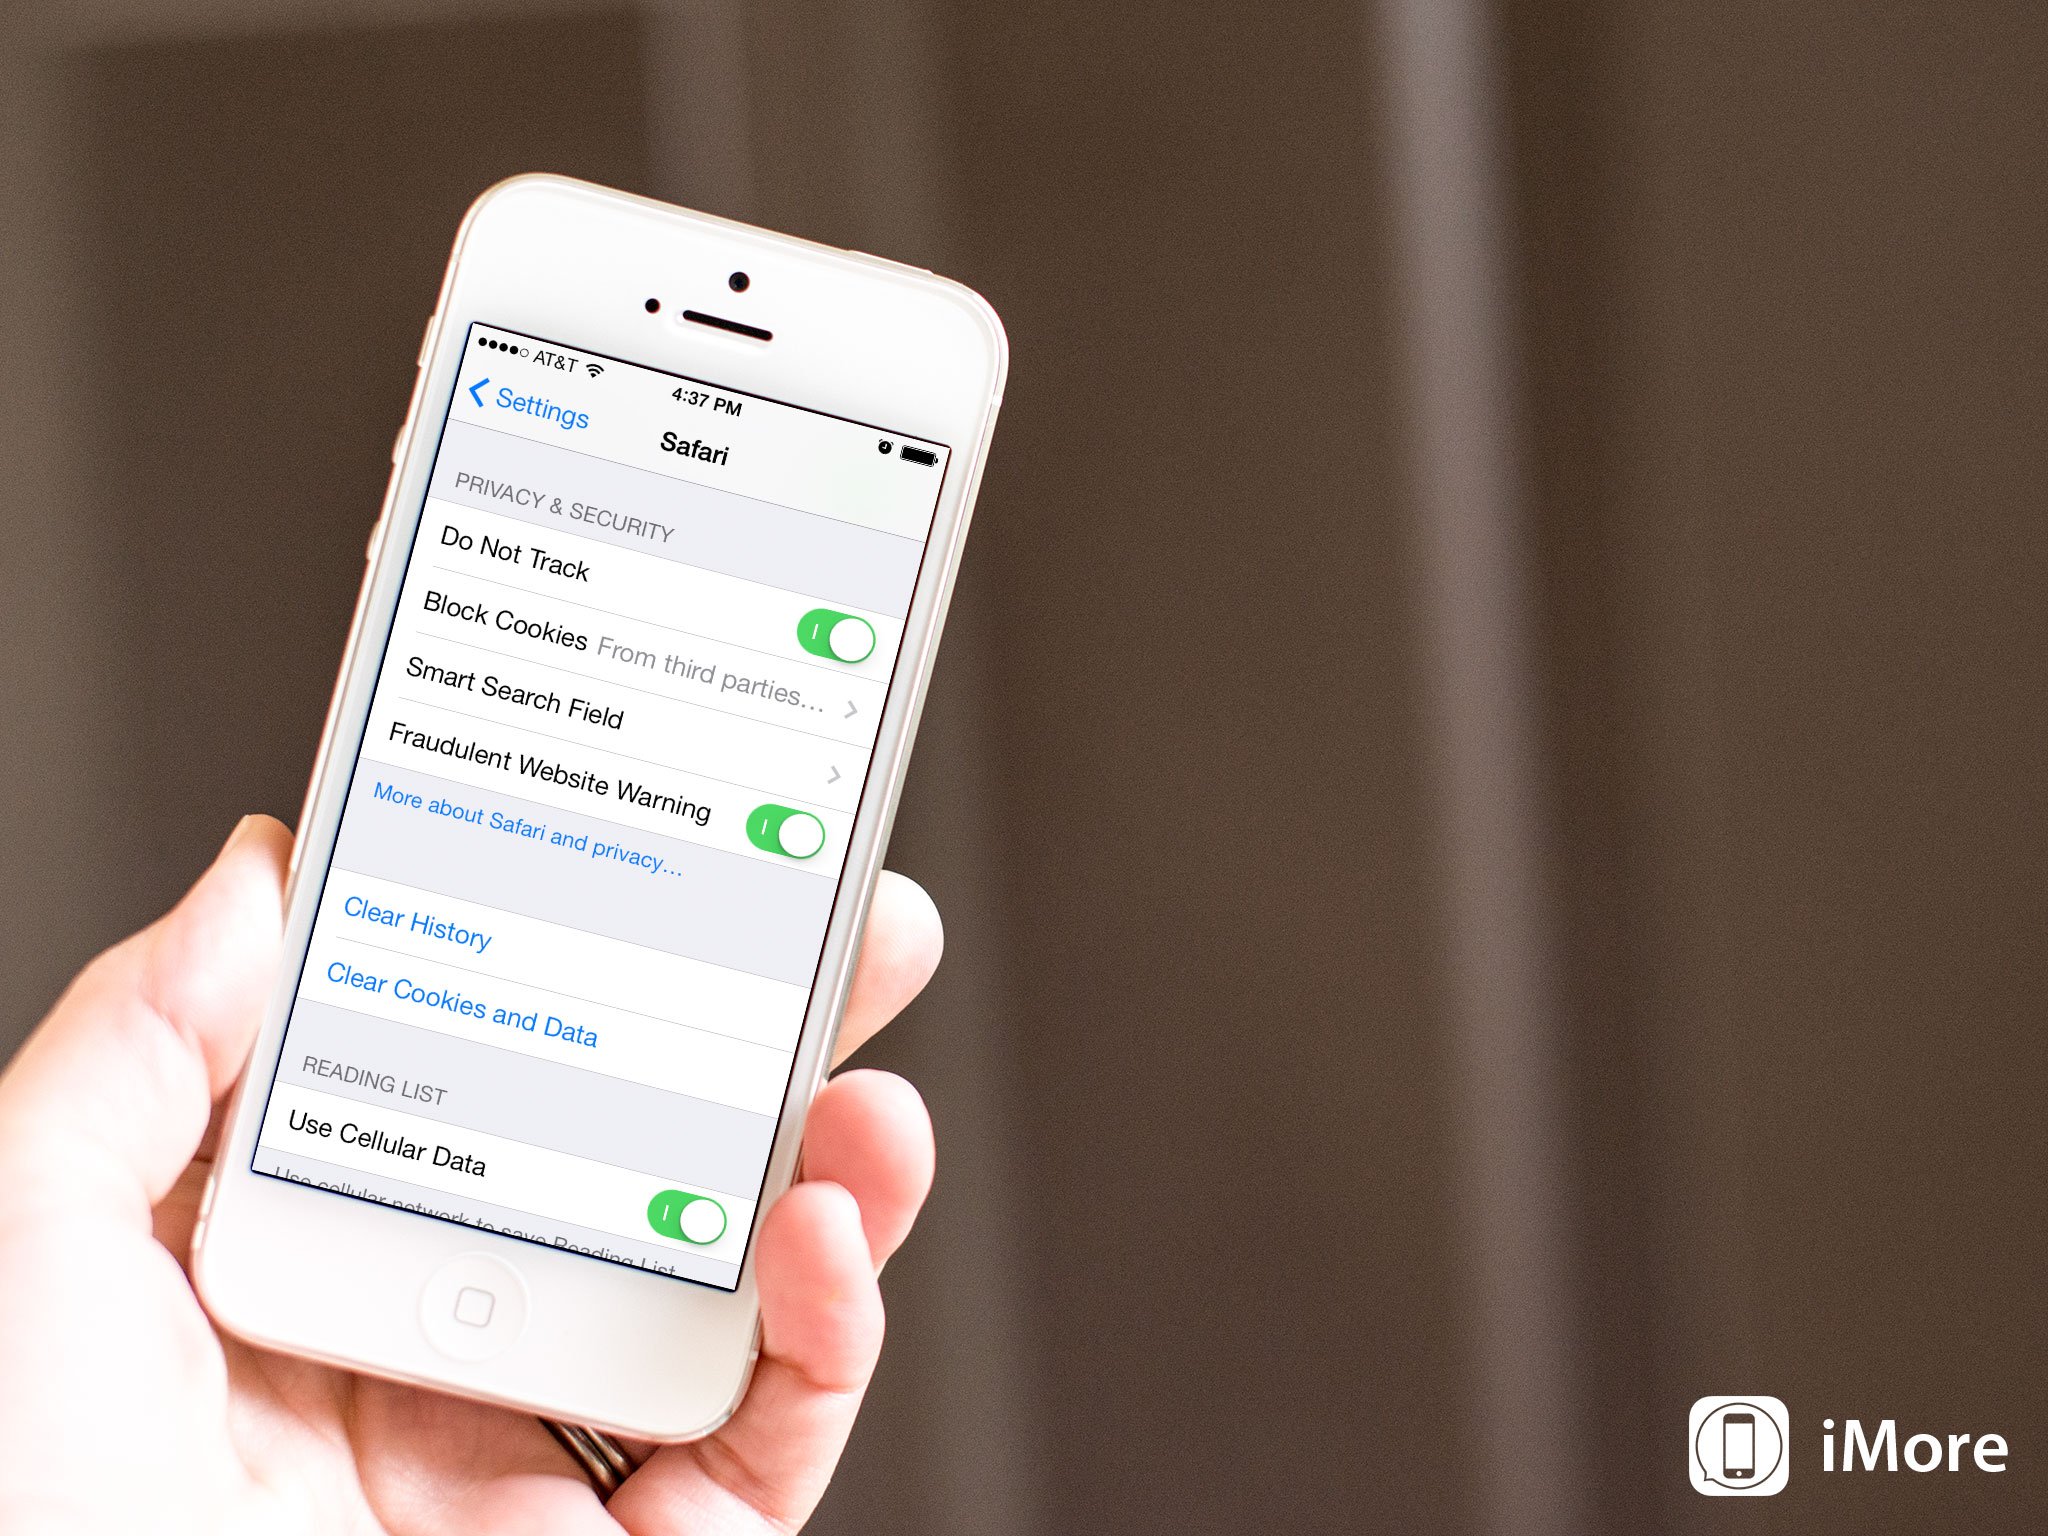 How to block cookies and stop websites from tracking your browsing activity in iOS 7 Safari